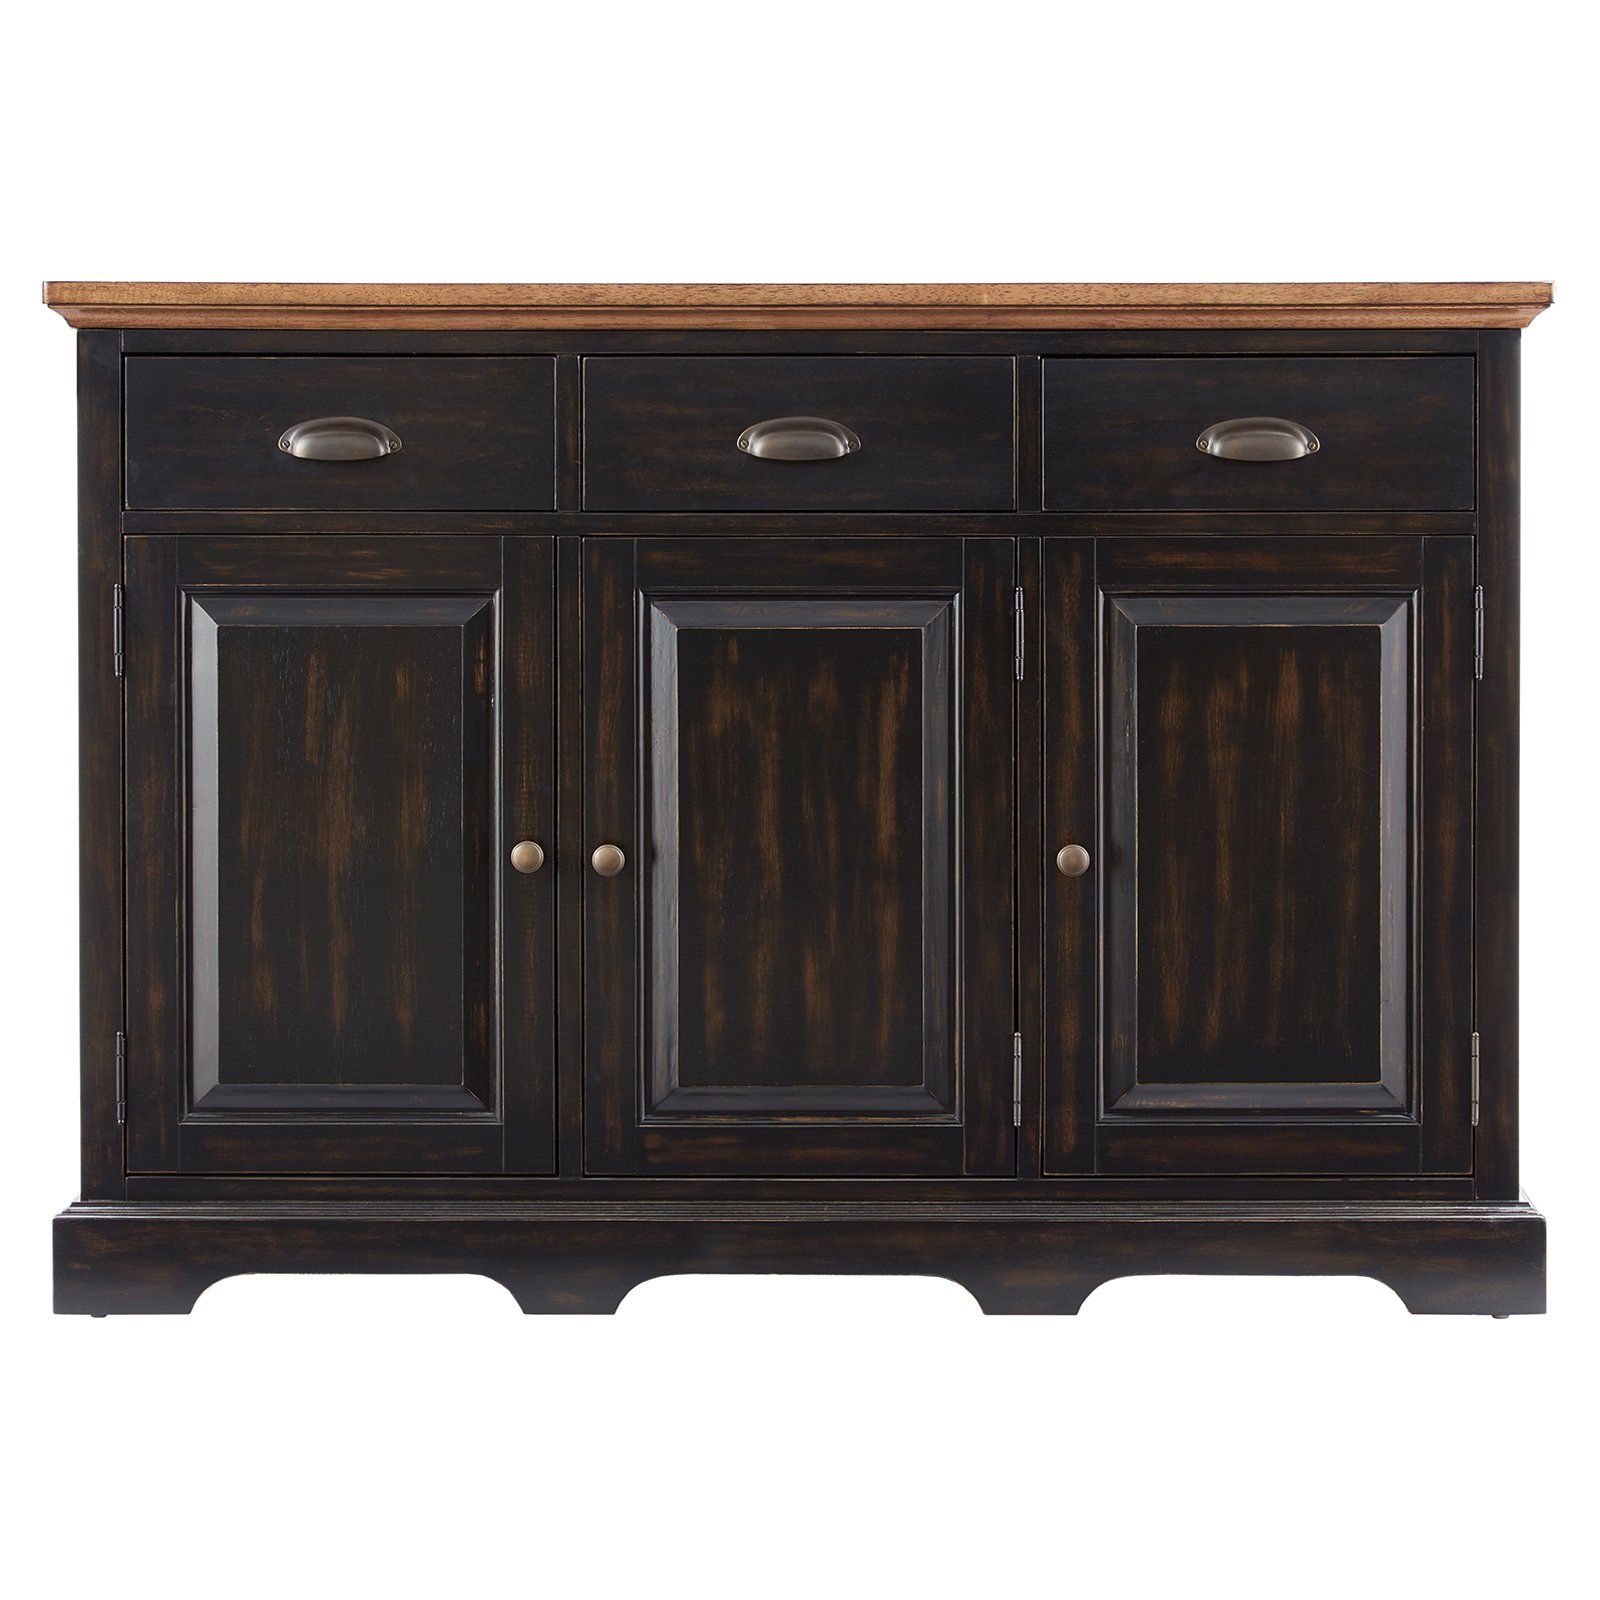 Fortville Sideboards Within Most Up To Date Weston Home 3 Door Server (View 9 of 20)